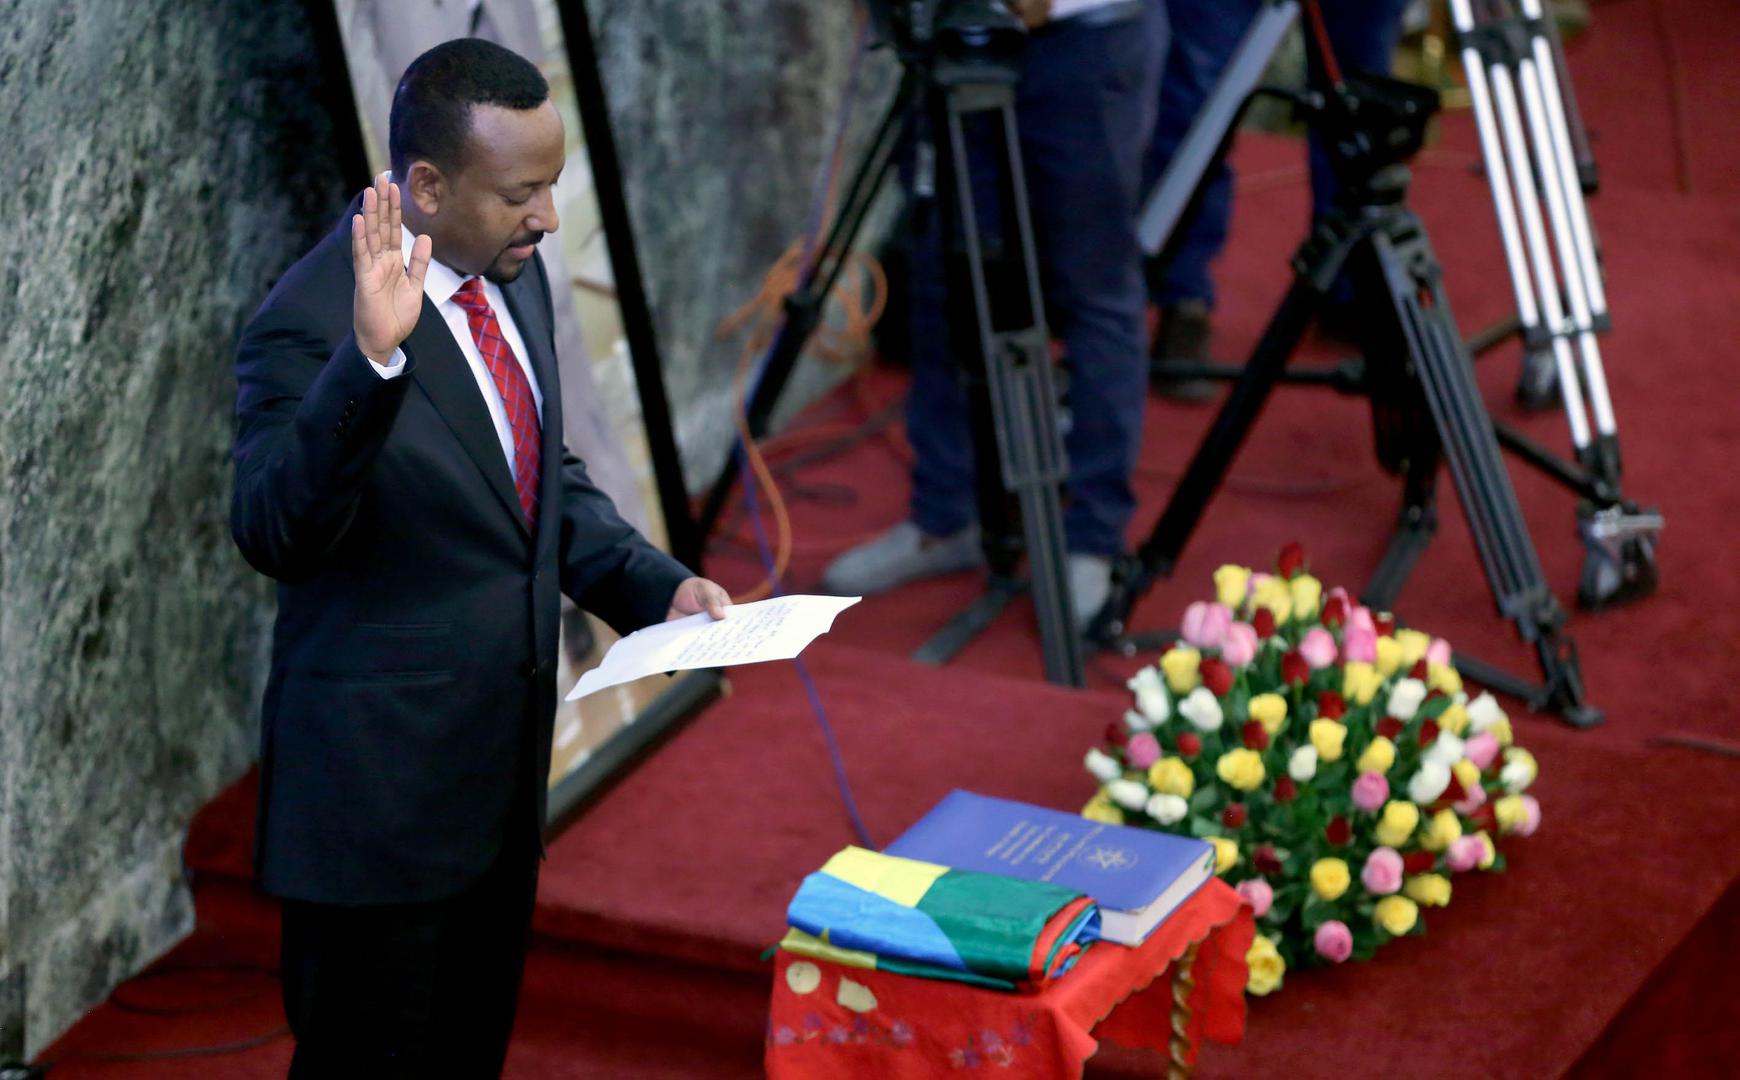 Abiy Ahmed, newly elected prime minister of Ethiopia, is sworn in at the House of Peoples' Representatives in Addis Ababa, April 2, 2018. © 2018 Hailu/Anadolu Agency/Getty Images